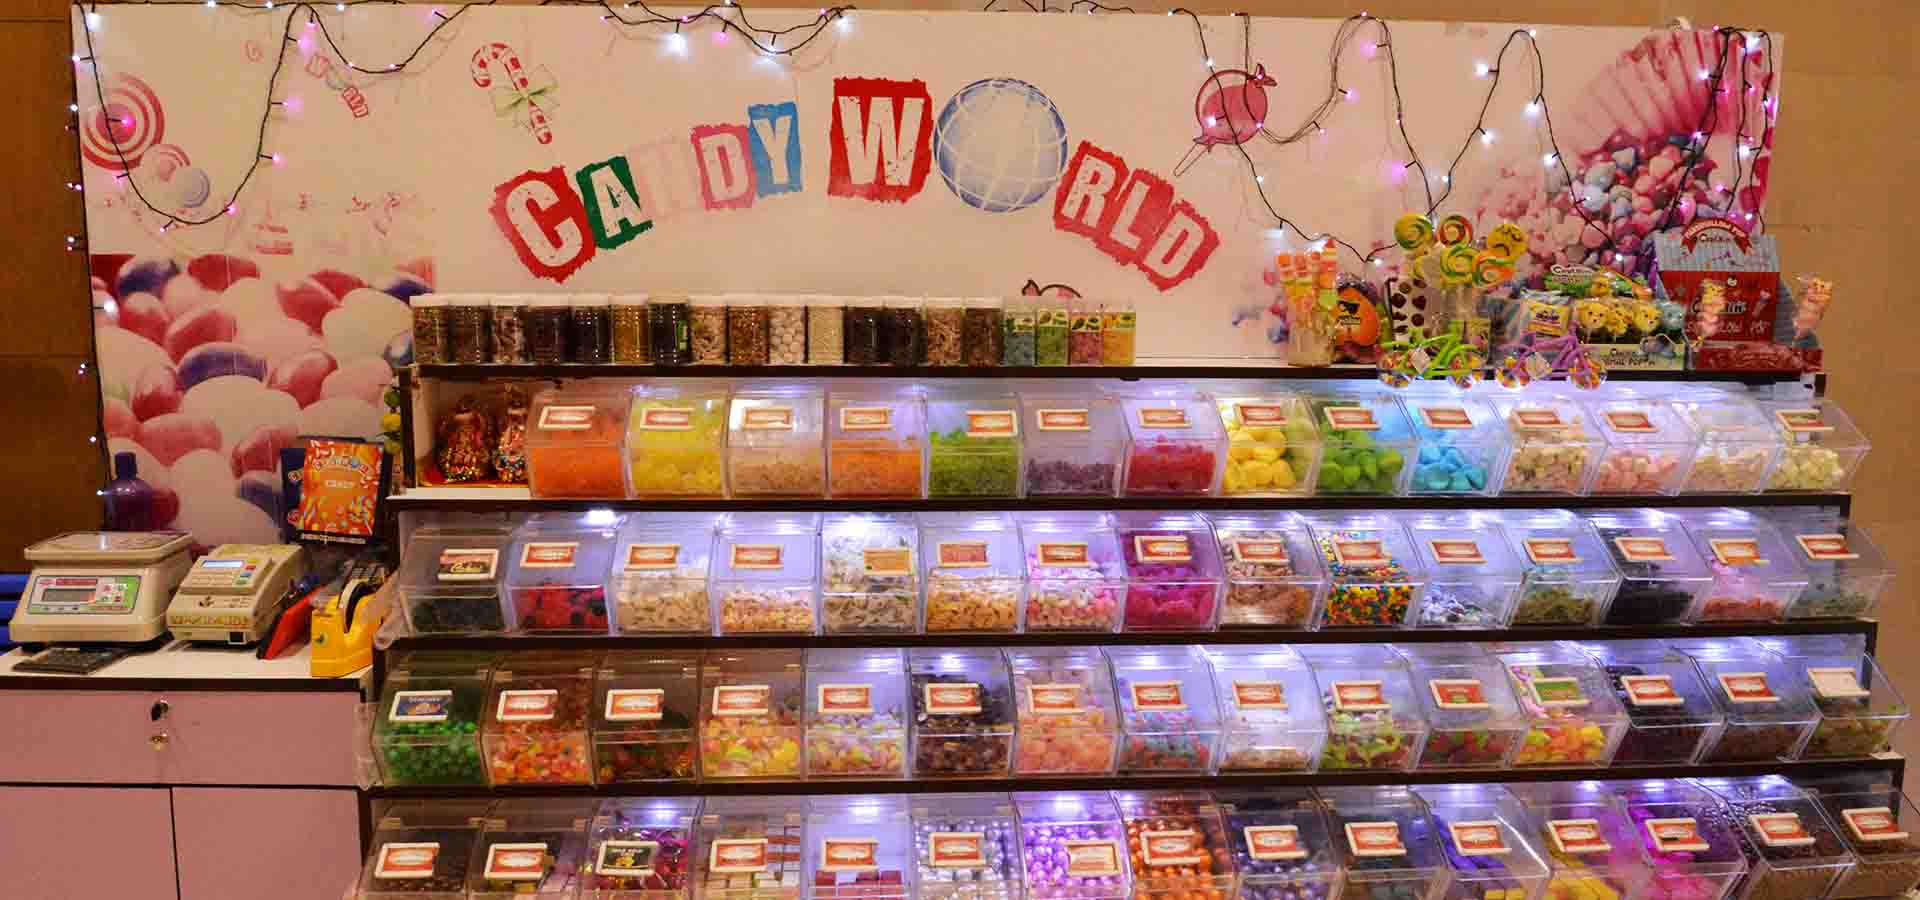 Candy World store photos in mall